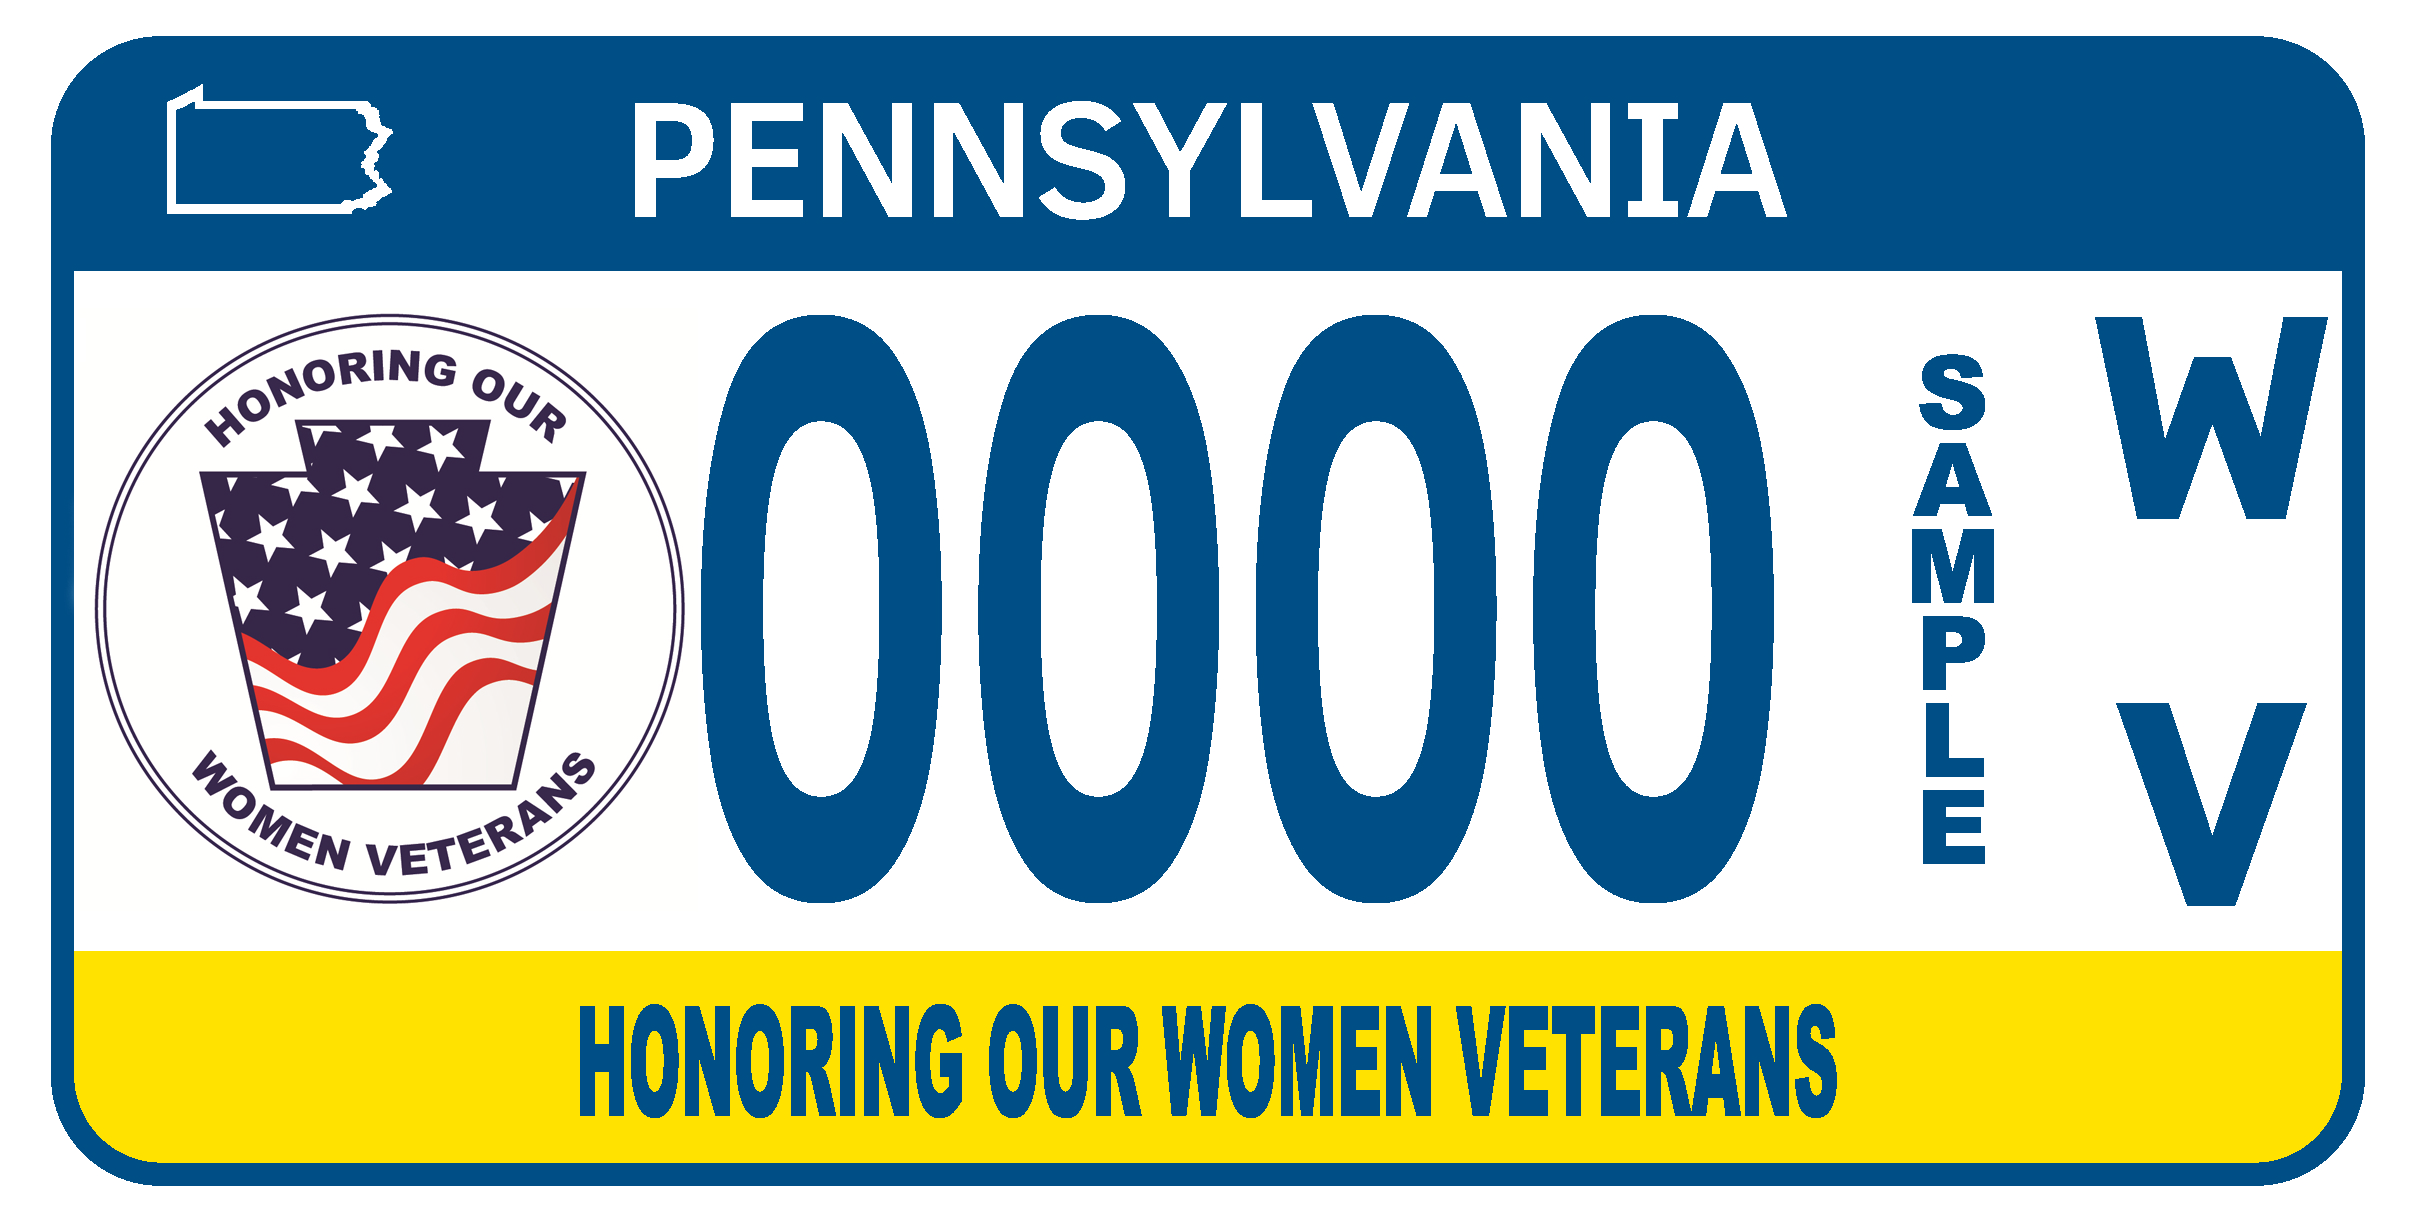 Standard yellow and blue Pennsylvania license plate with a honoring women veterans logo on the left.